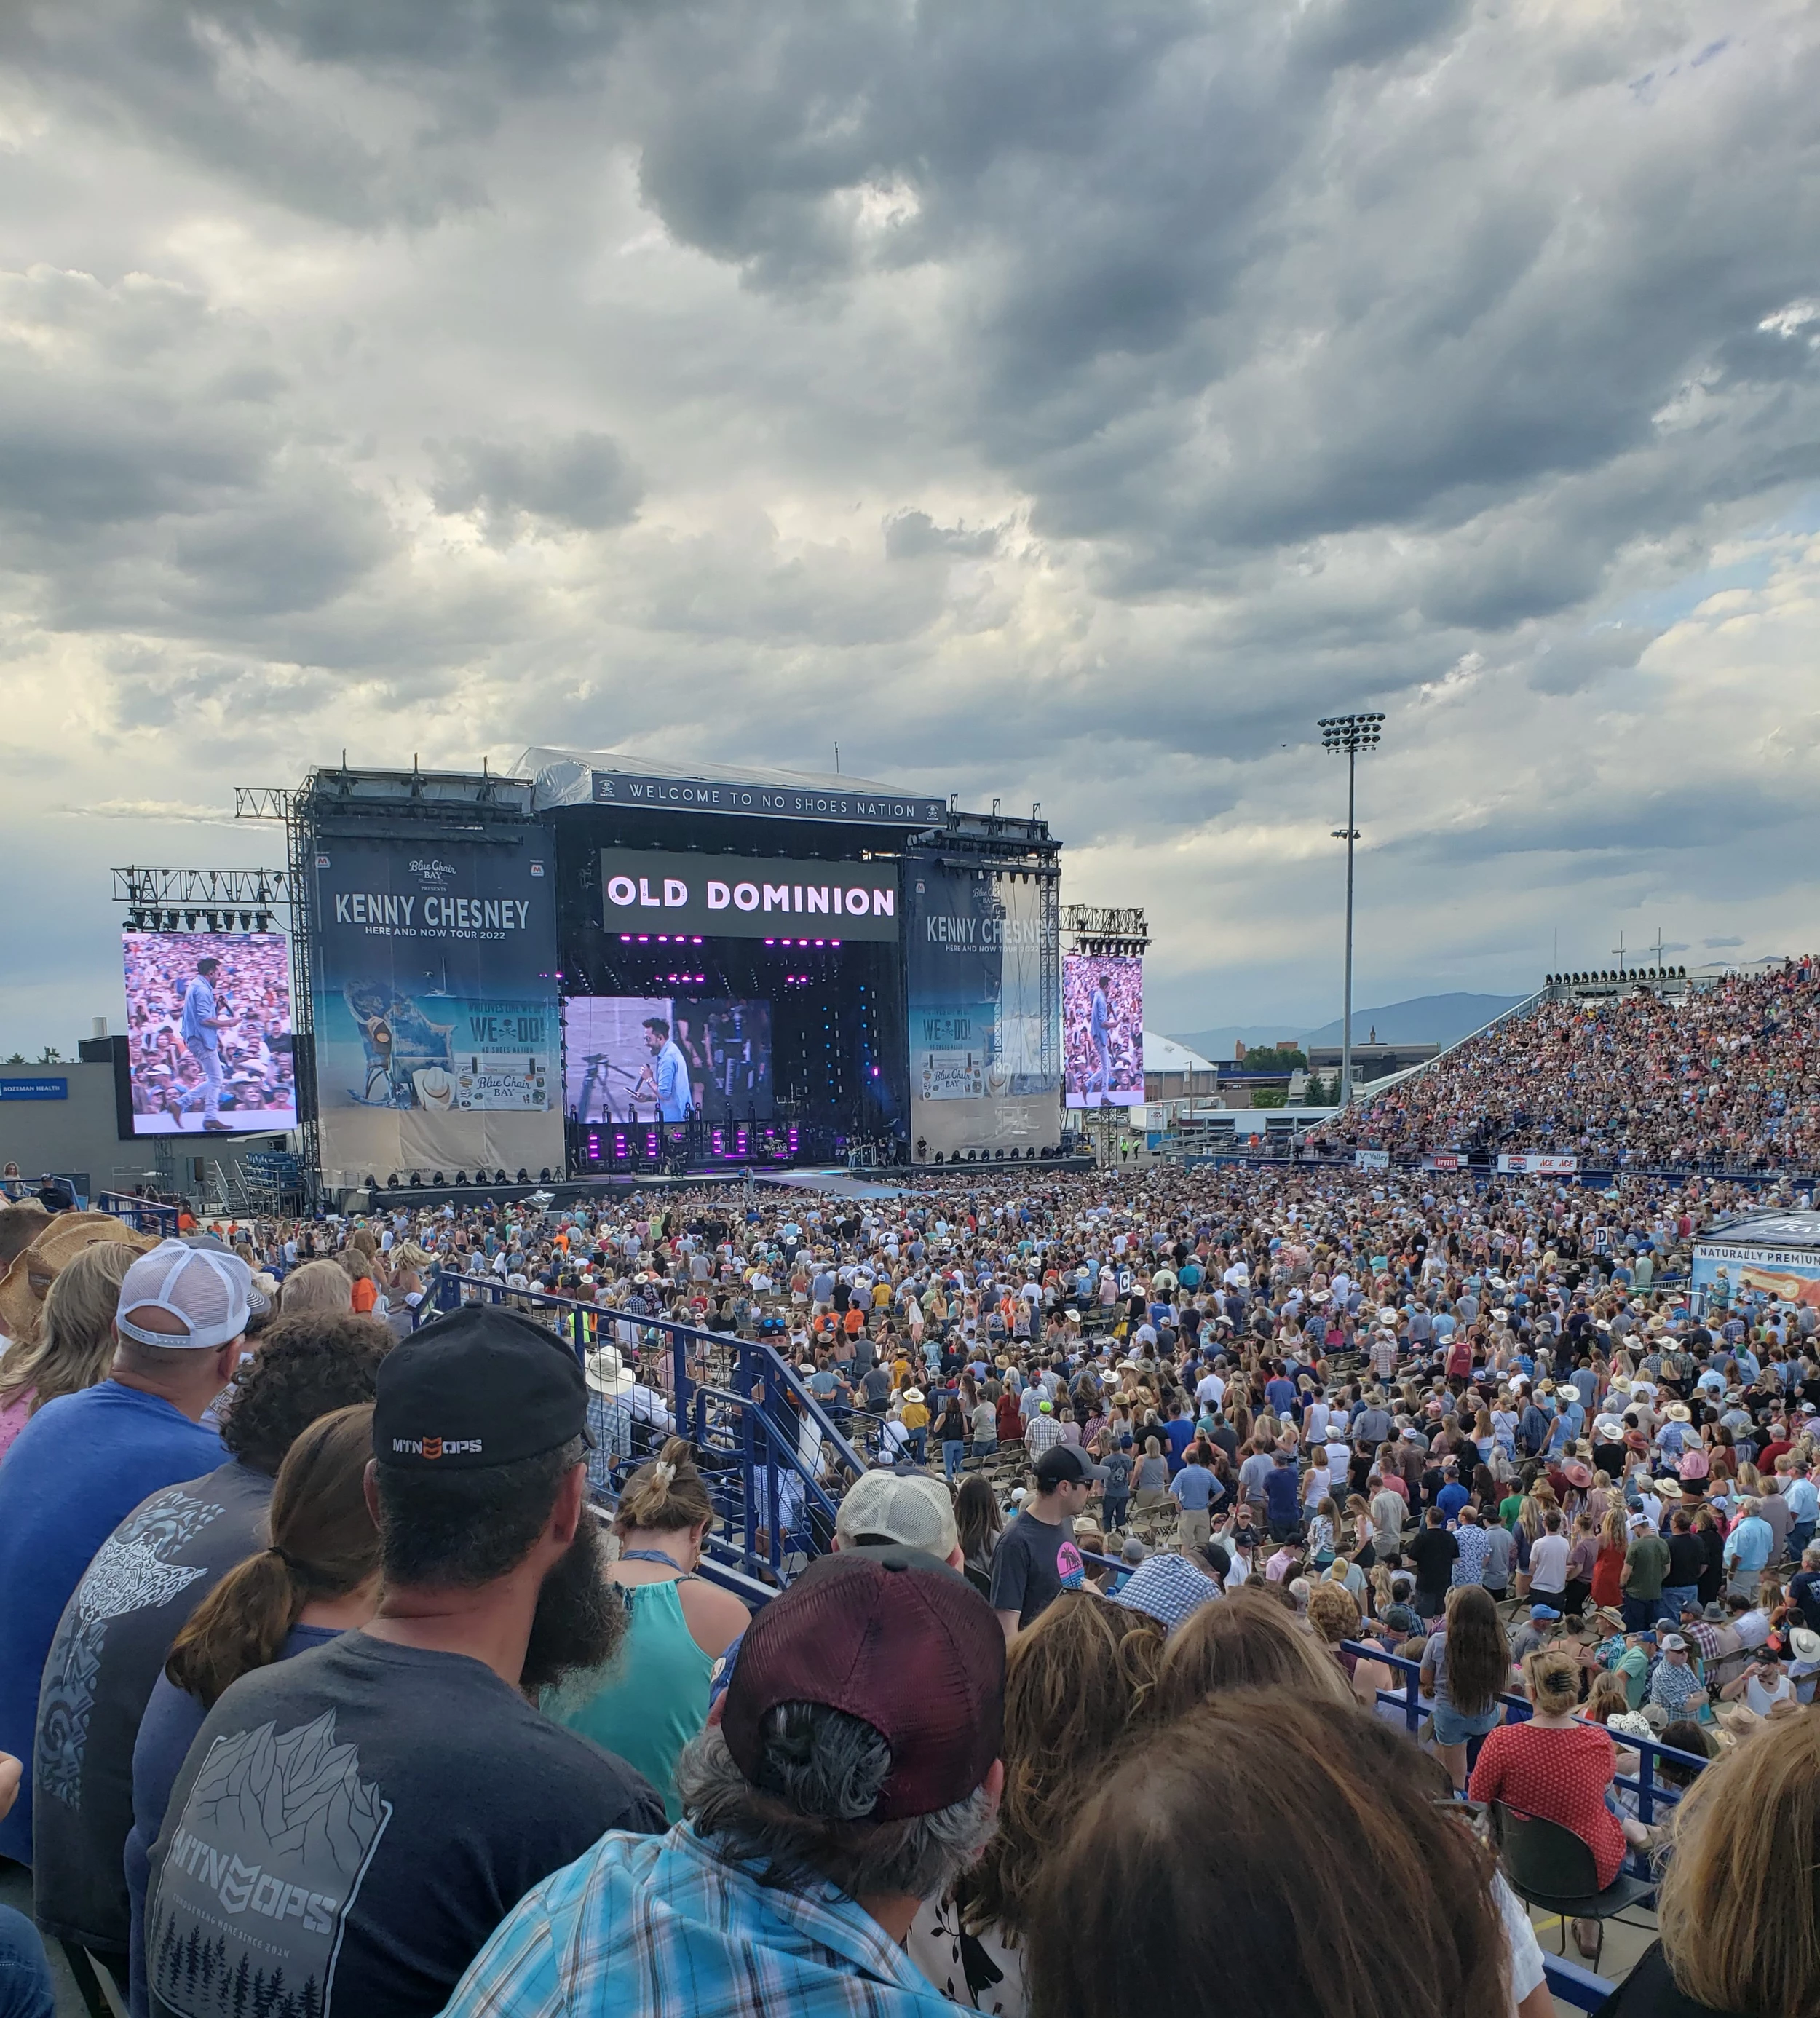 A Perfect Night For 24,000 At Sold Out Concert In Bozeman